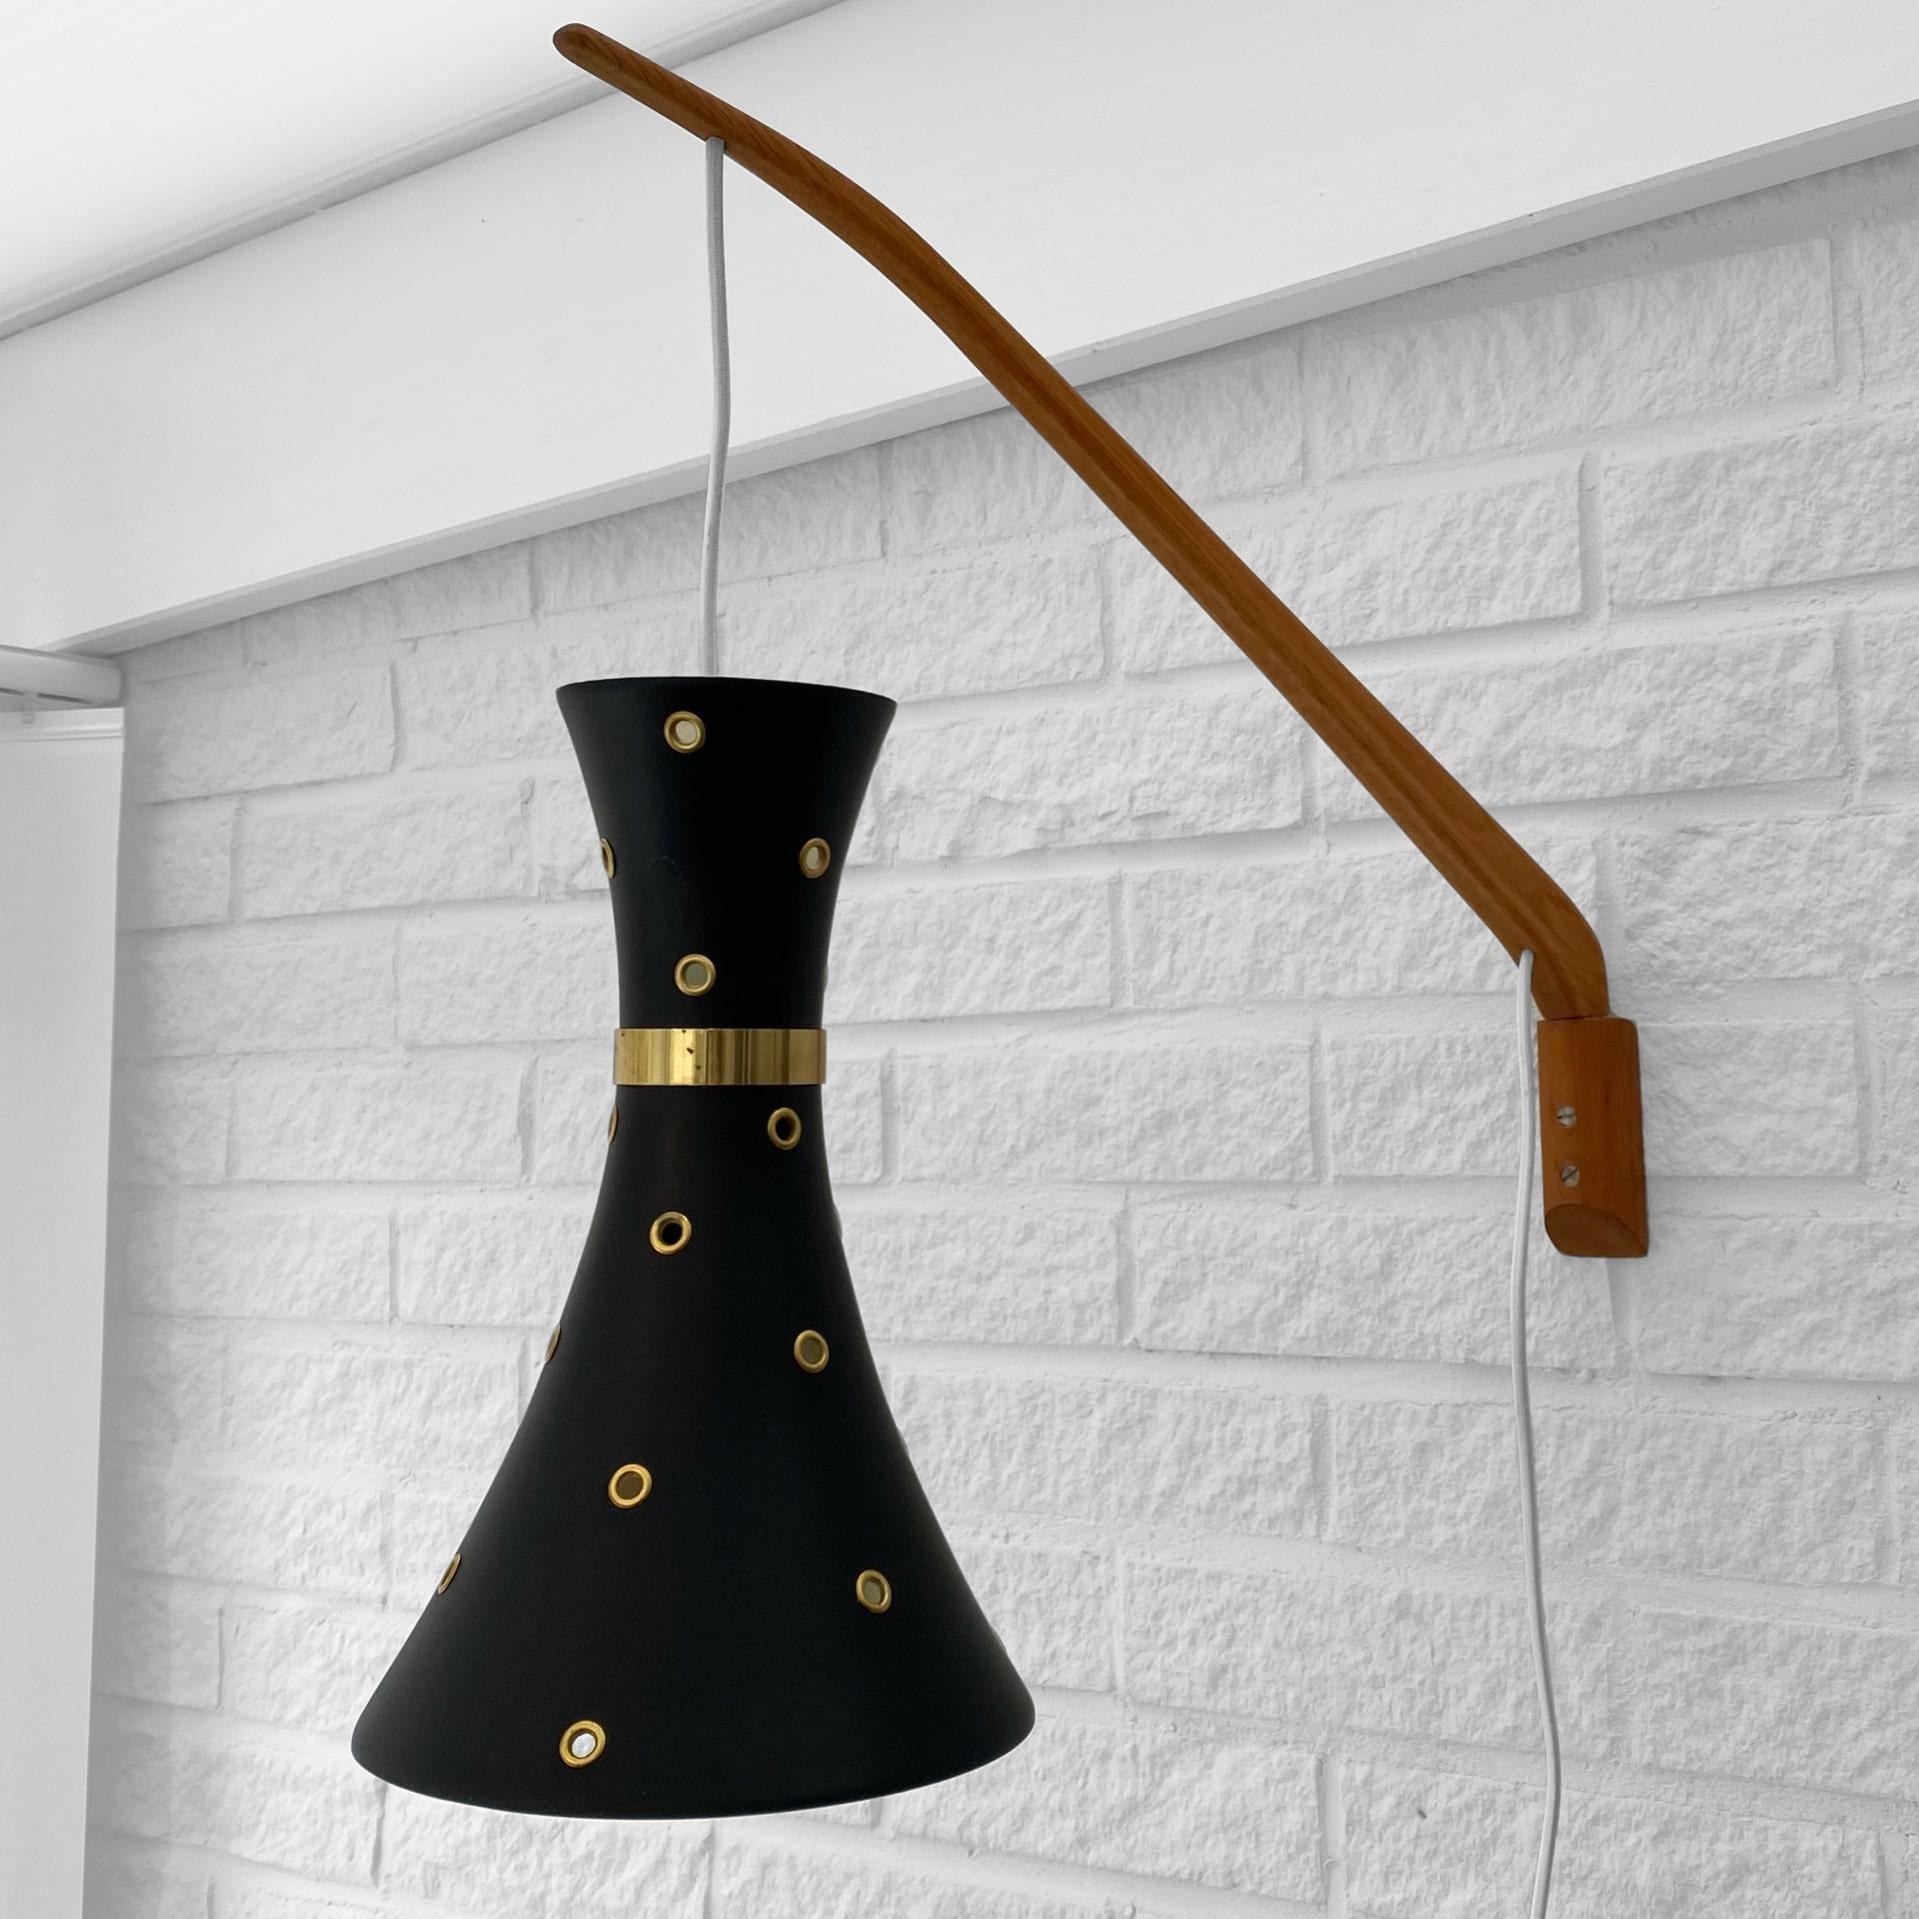 A Scandinavian mid-century wall lamp, crafted from oak and metal with a slender wooden arm. Black hourglass-shaped metal shade with perforated dots and brass details. Produced by an unidentified Swedish manufacturer in the 1950s. Length of the arm